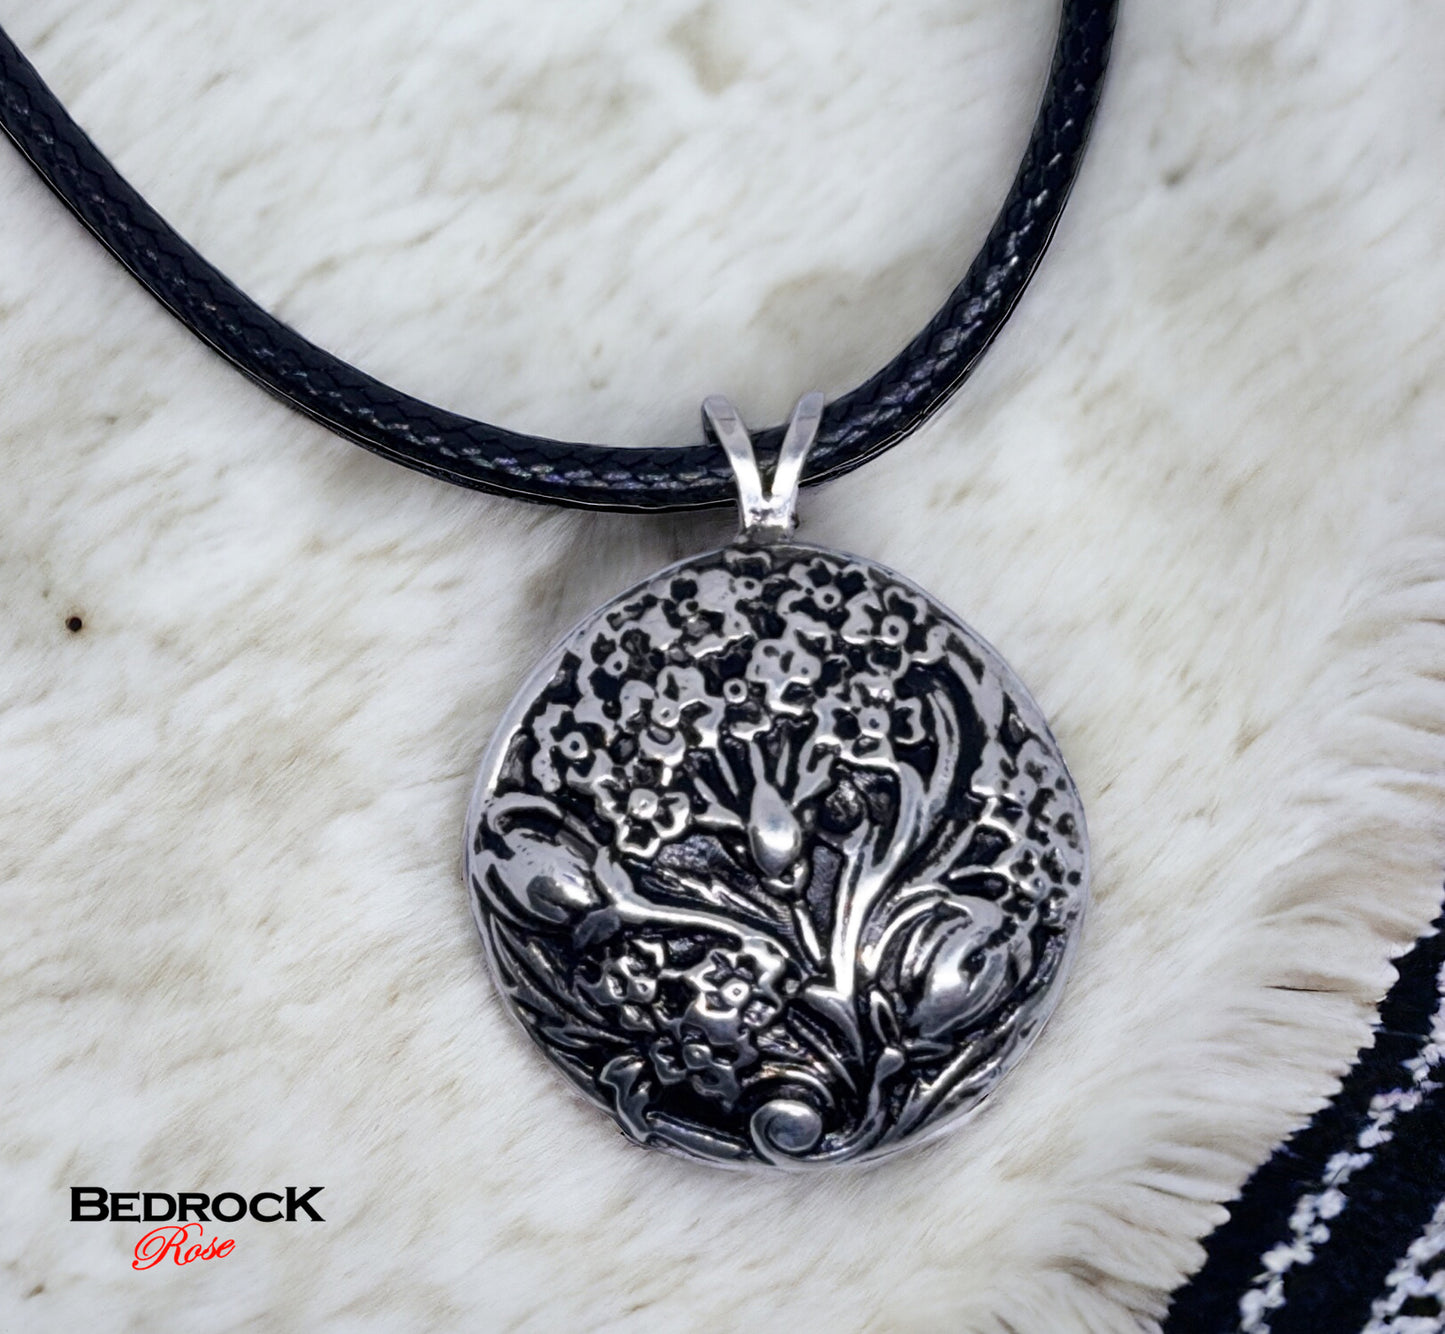 Silver Floral Medallion Pendant - Close up of Intricate Floral Design, Handmade Jewelry, Flower Necklace, Heirloom quality pendant, gift for her